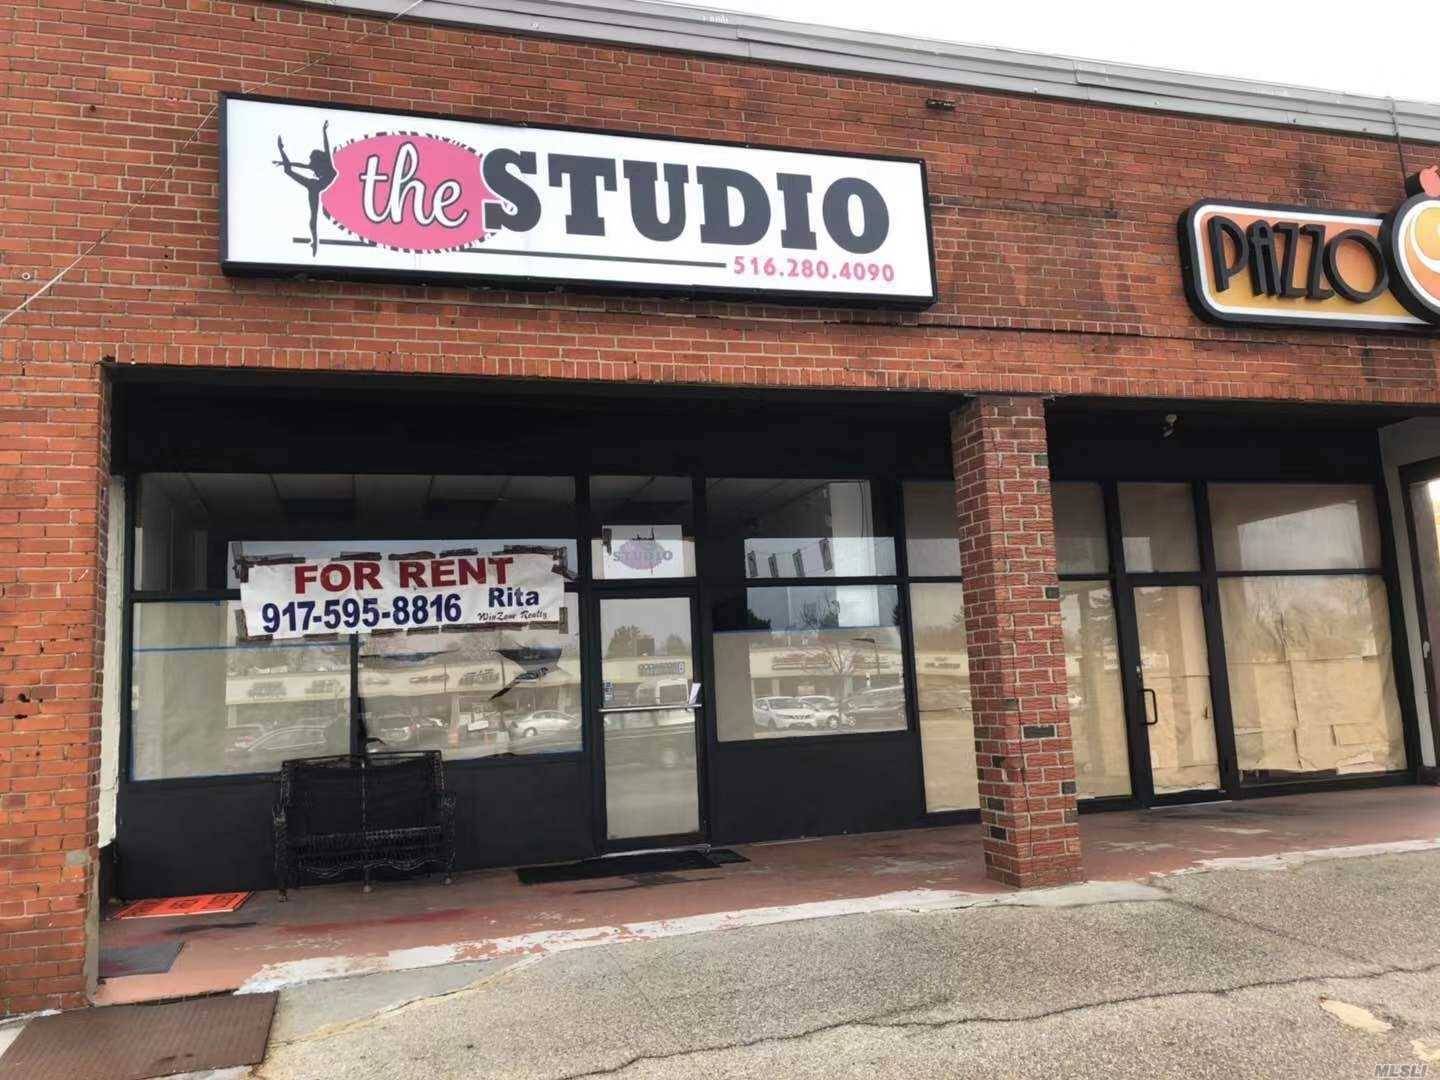 1300 Sqft Storefront, Good For Office, Retail And Other Business.